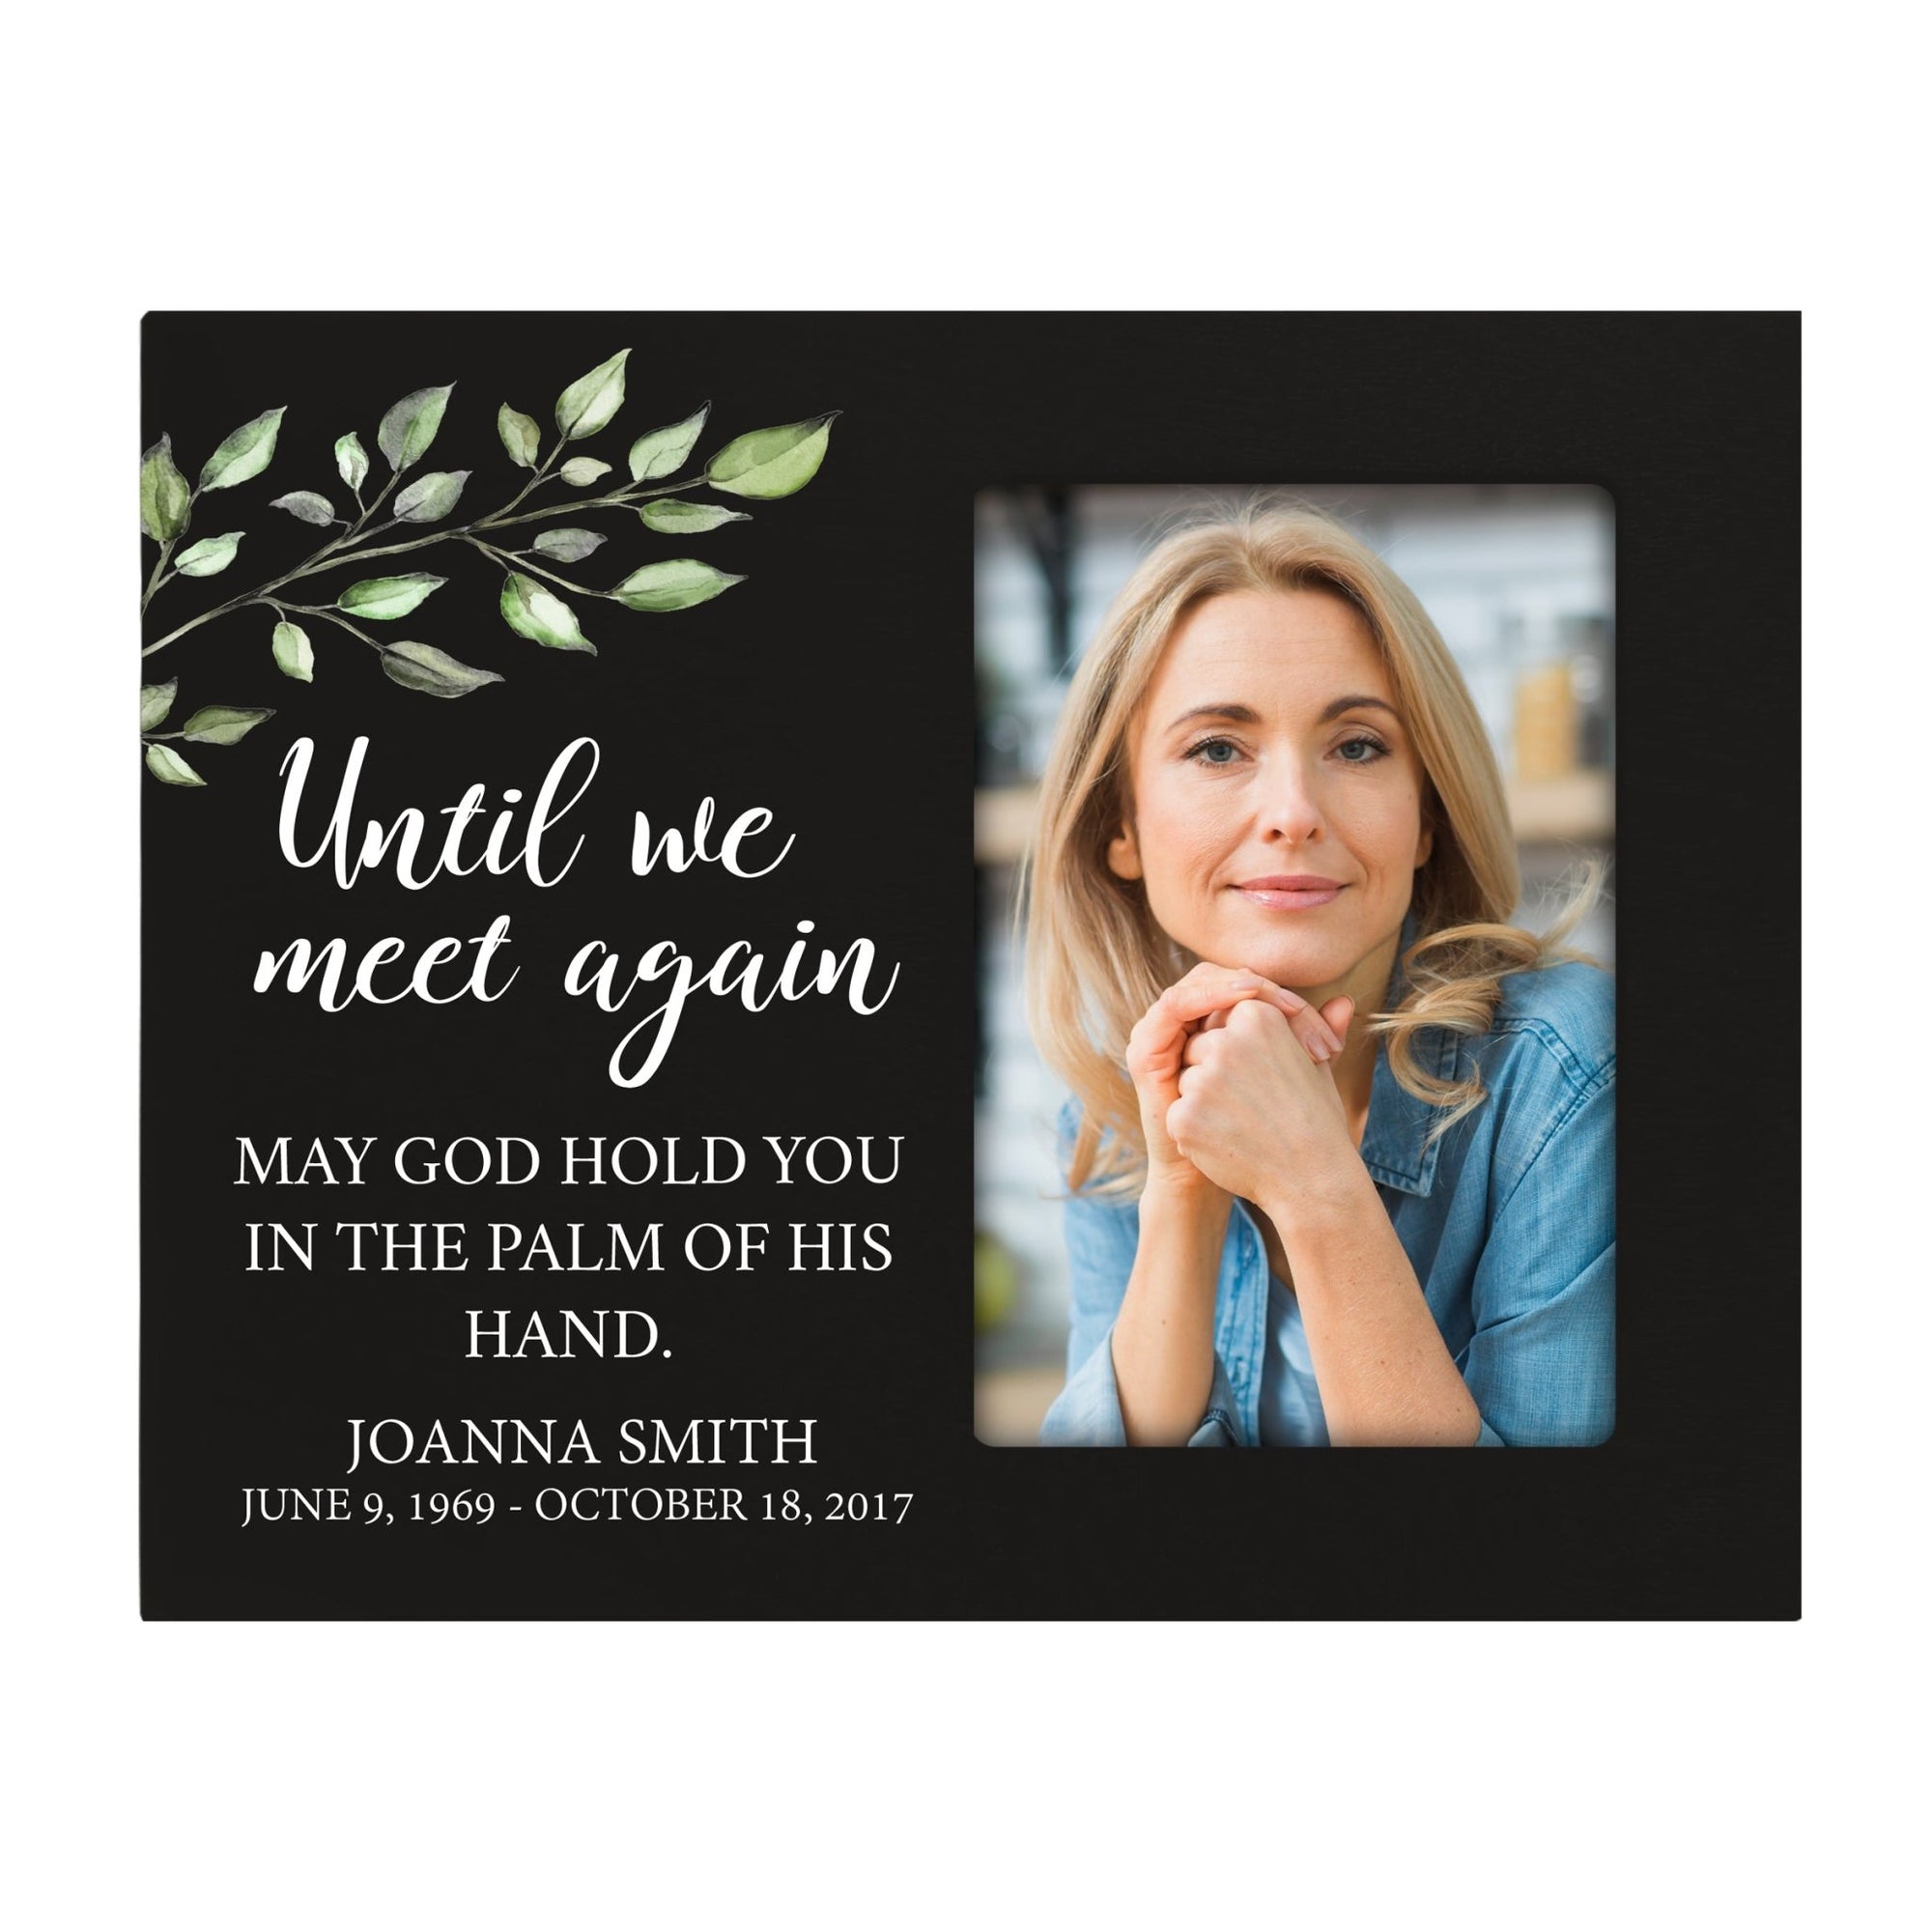 Personalized Horizontal 8x10 Wooden Memorial Picture Frame Holds 4x6 Photo - Until We Meet Again (Black) - LifeSong Milestones